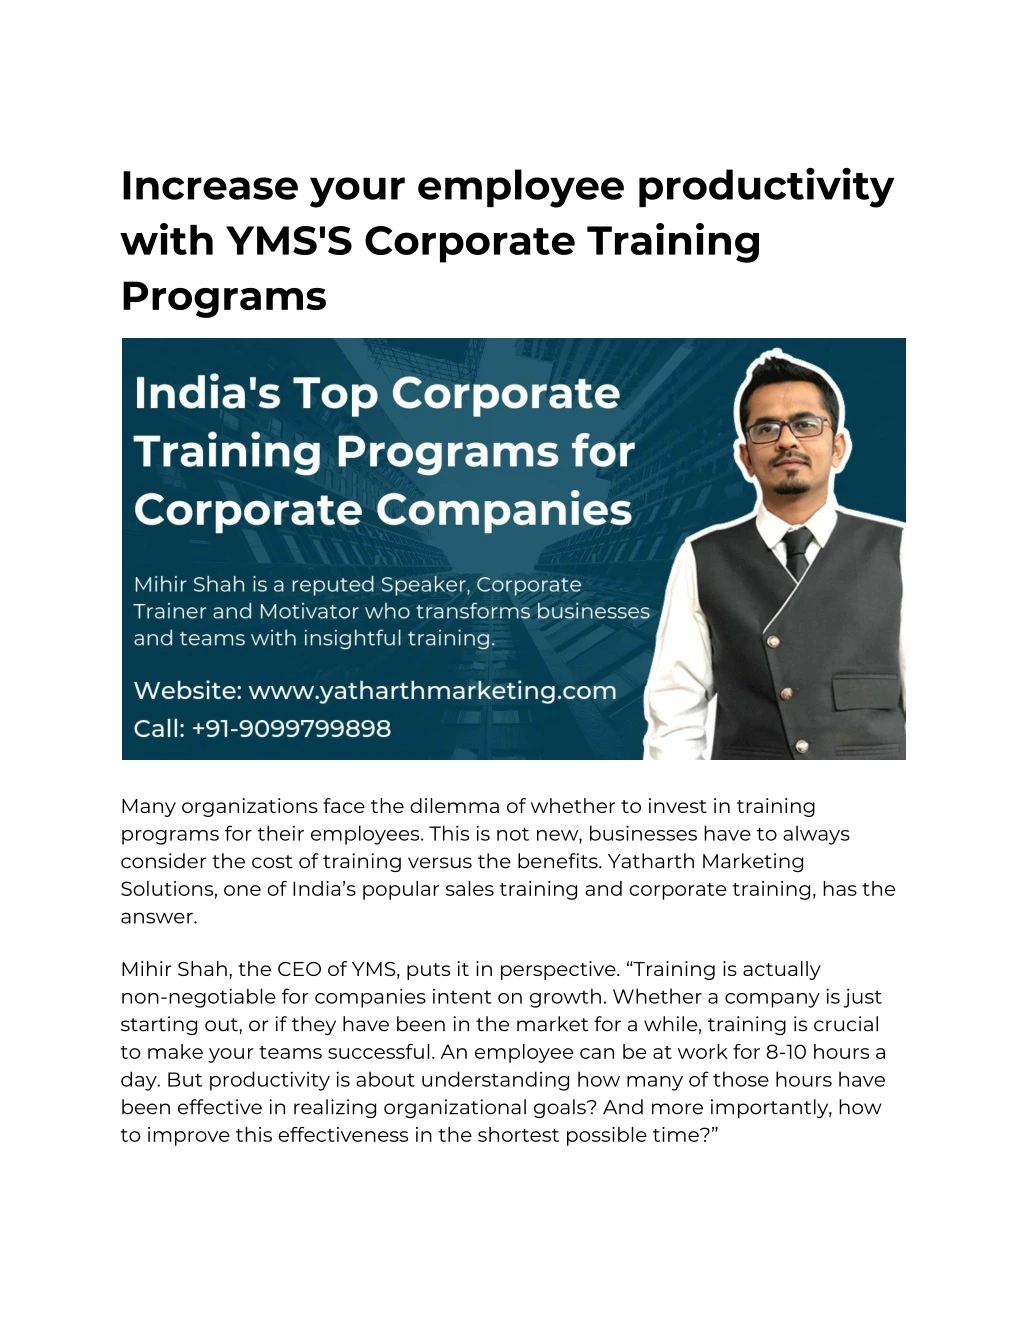 increase your employee productivity with